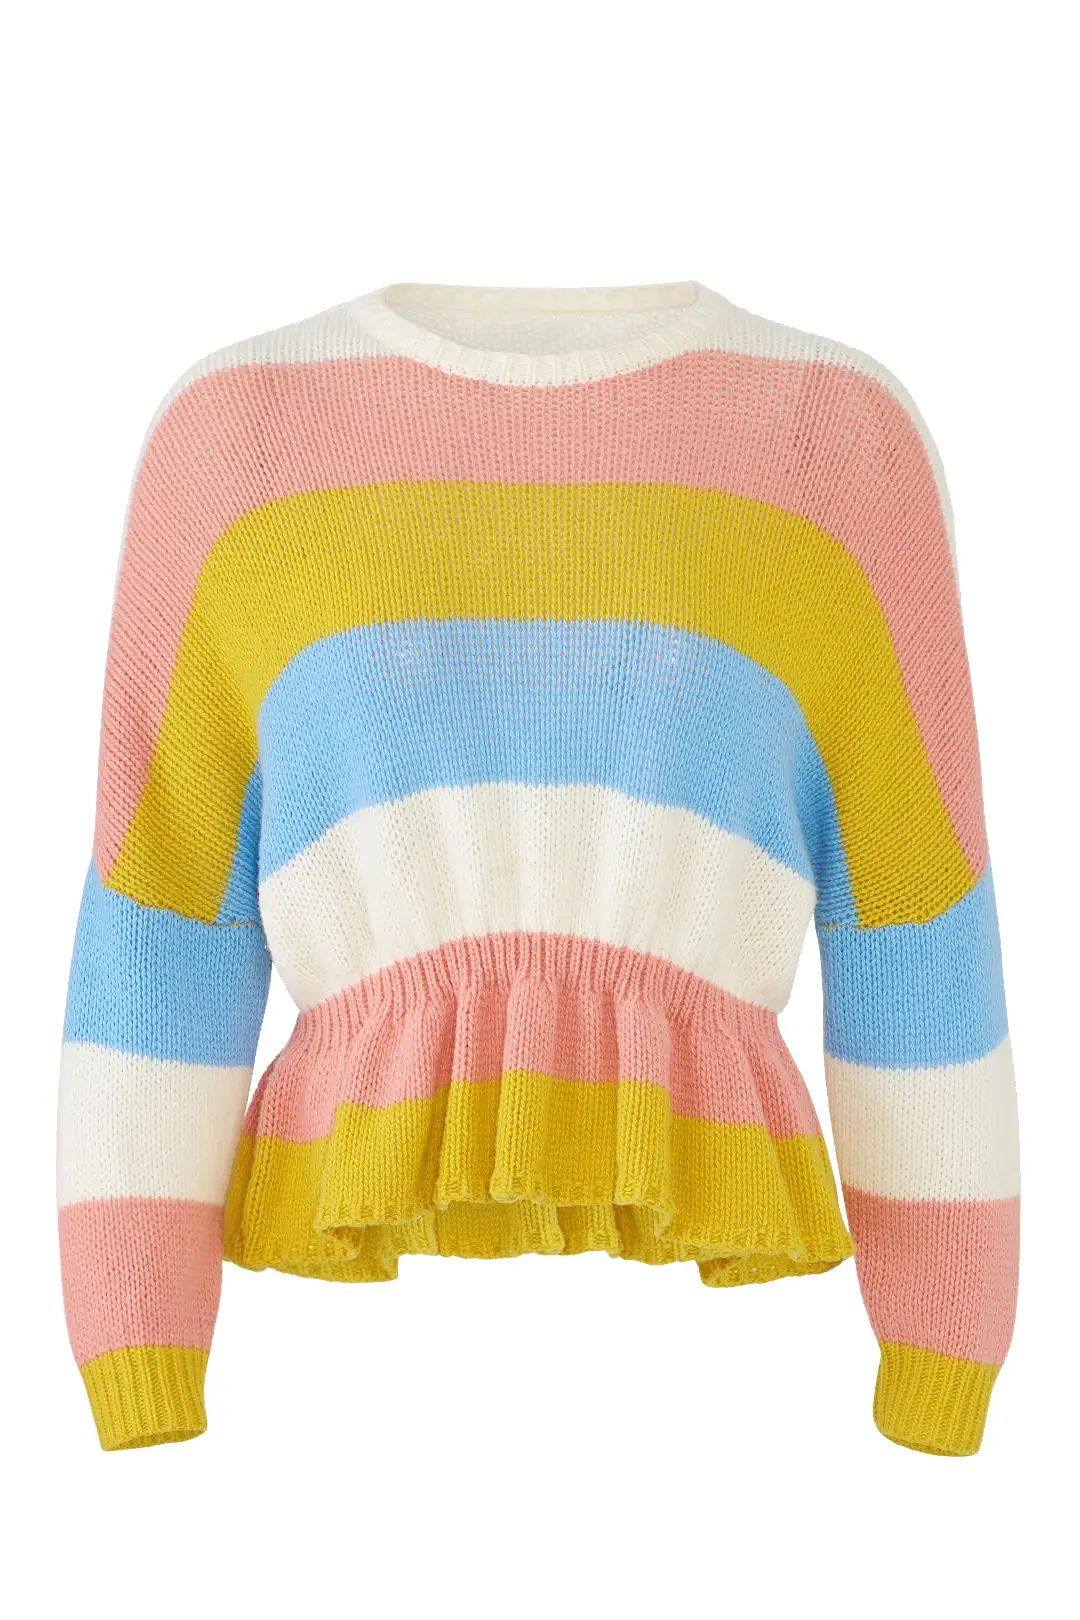 Pastel Striped Sweater | Rent The Runway